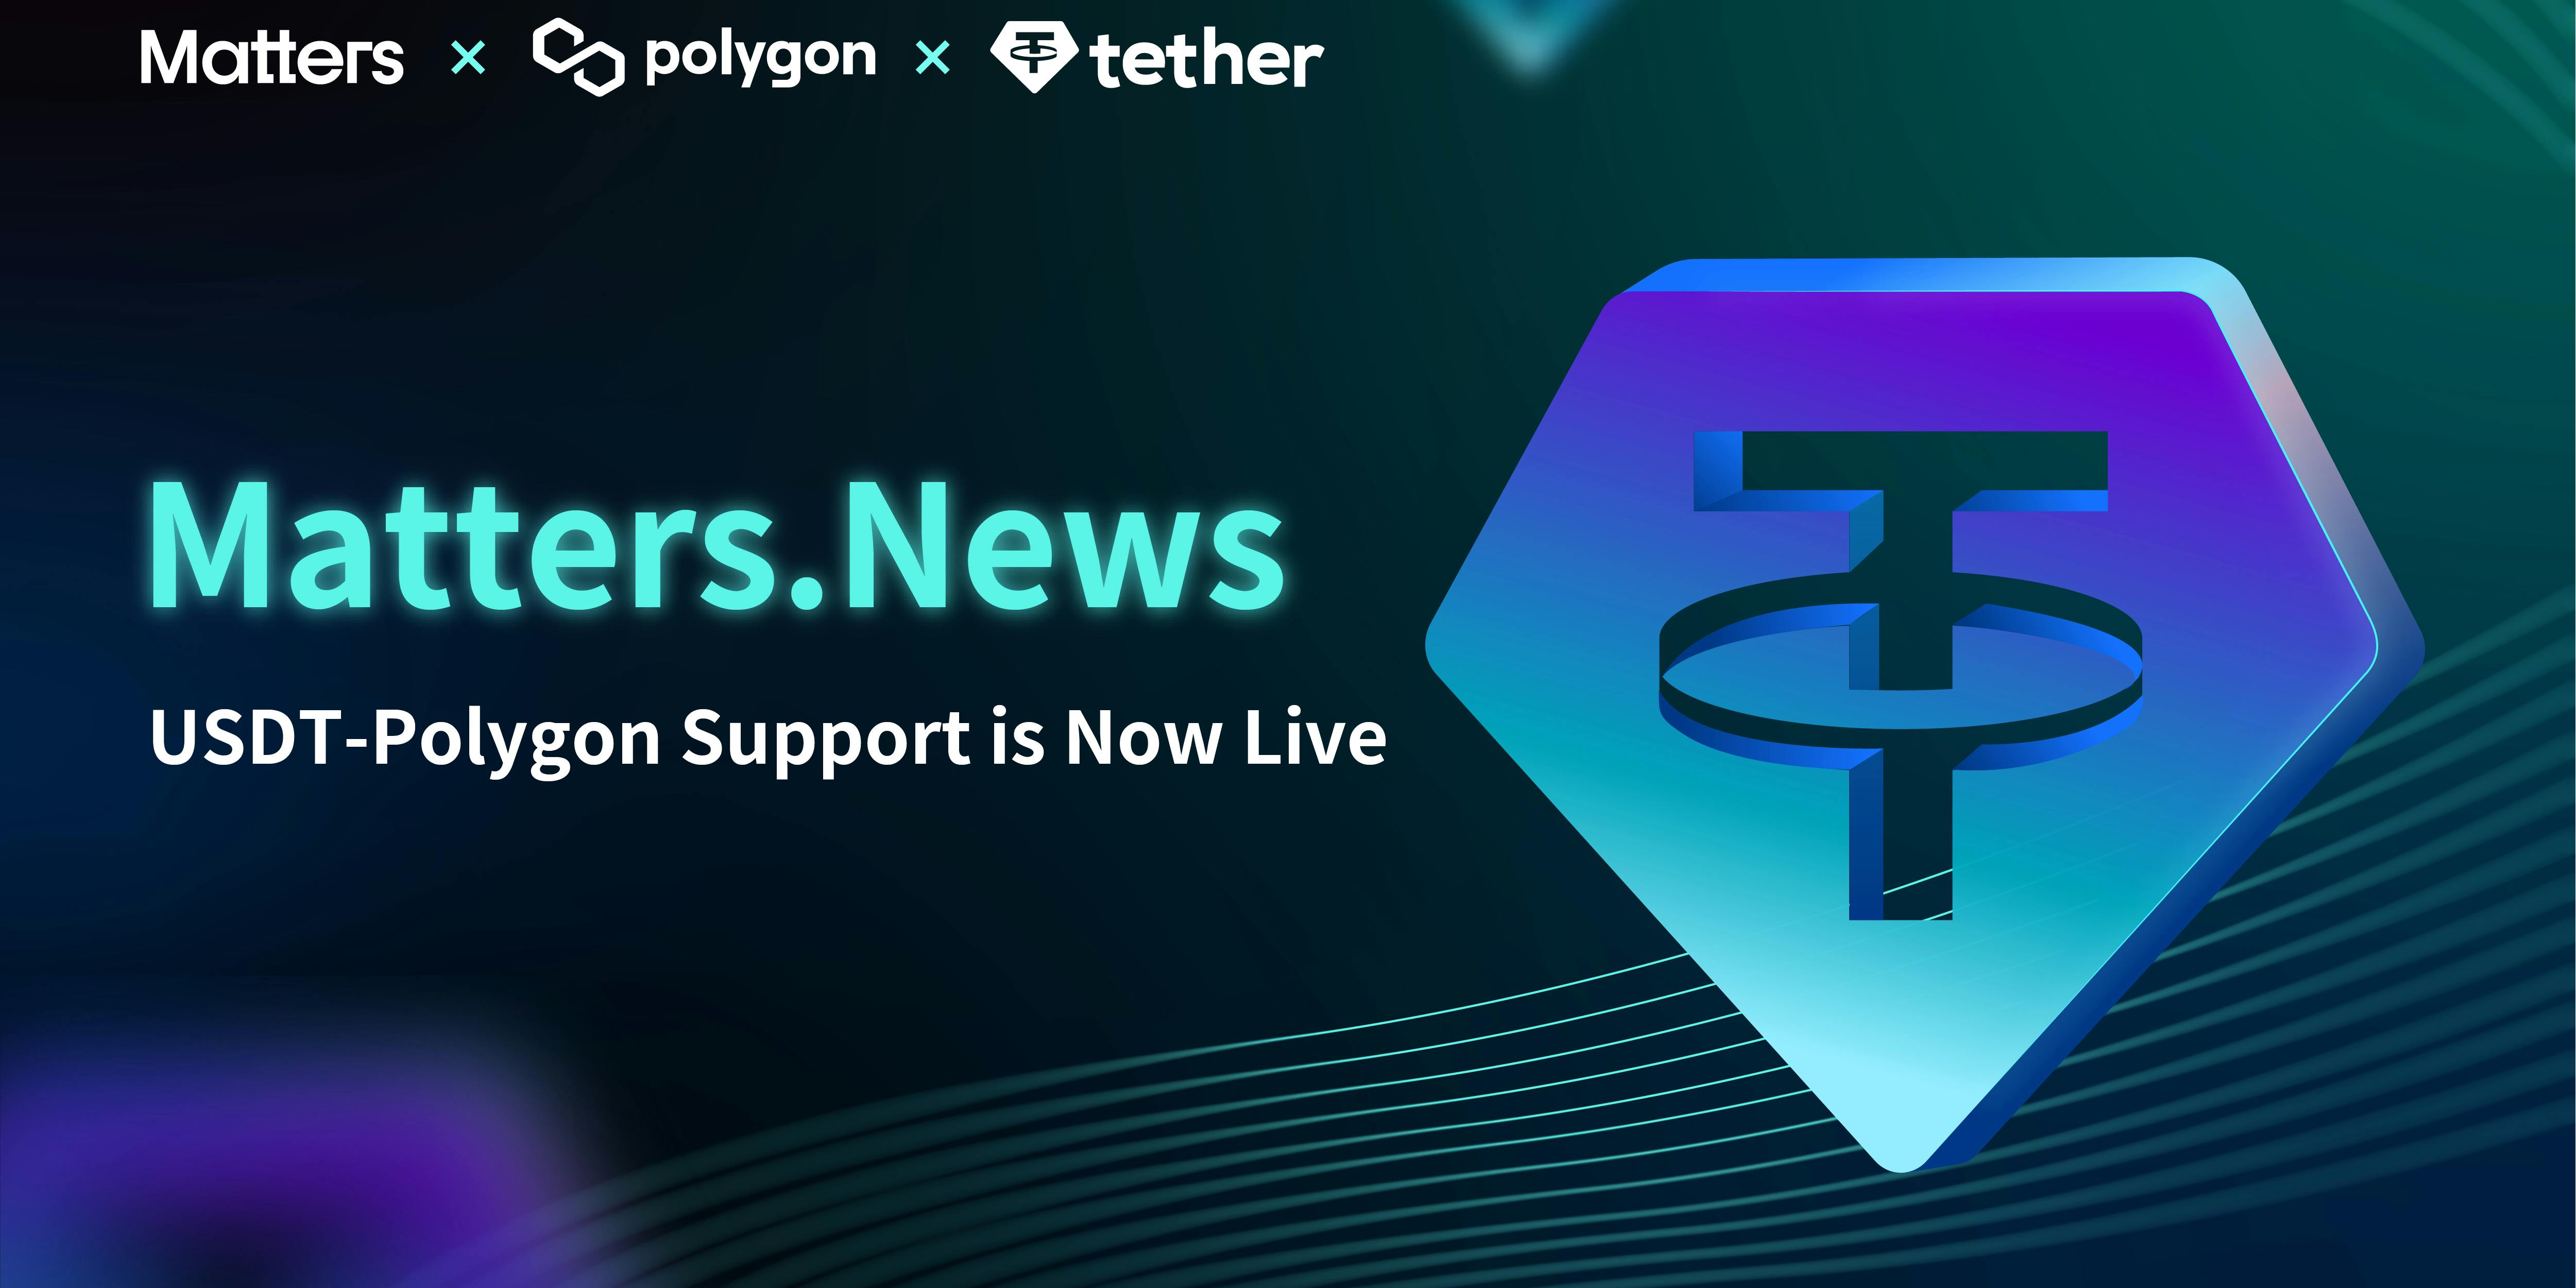 Matters.News now support Polygon-USDT as one of the cryptocurrencies payment methods.